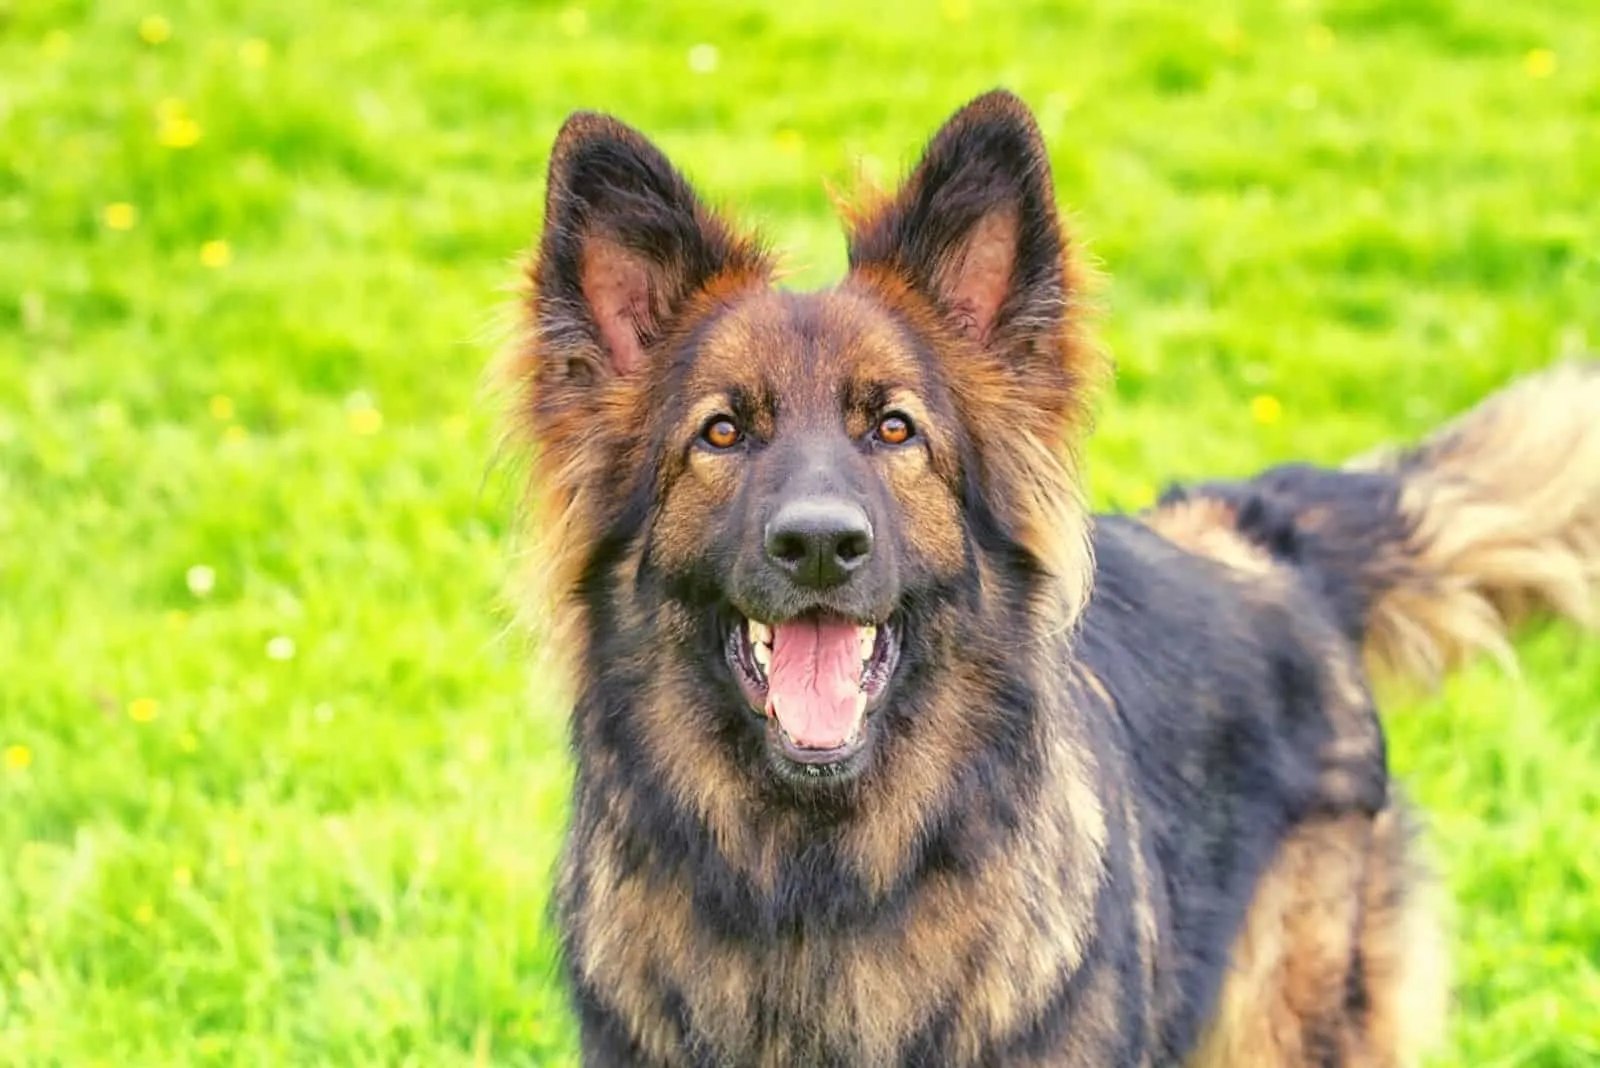 Excited German Shepherd Dog stood on grass barking at the camera